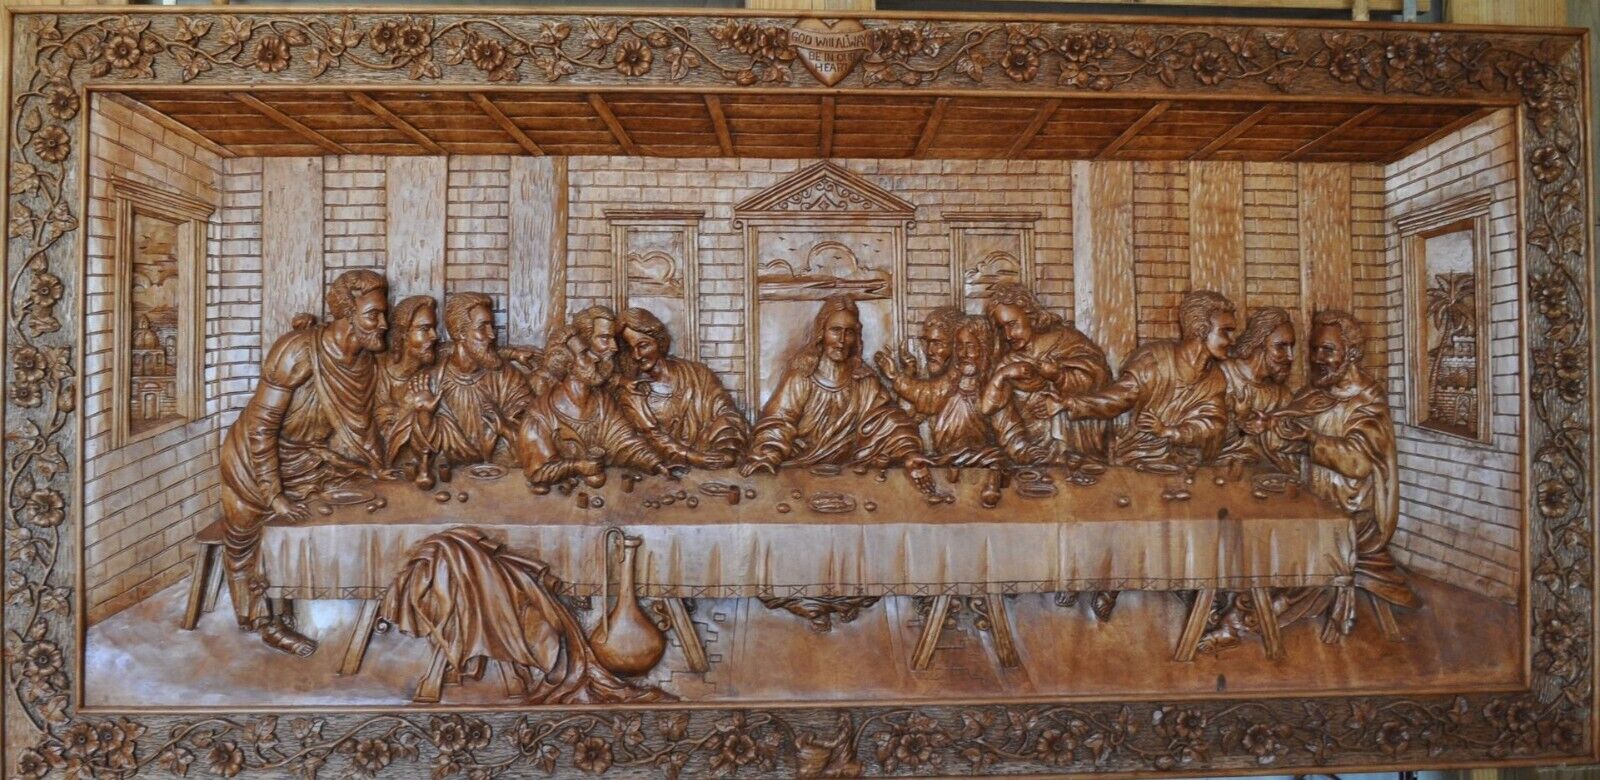 Hand Carved Wooden Last Supper Sculpture Wall Plaque Art Work Religious